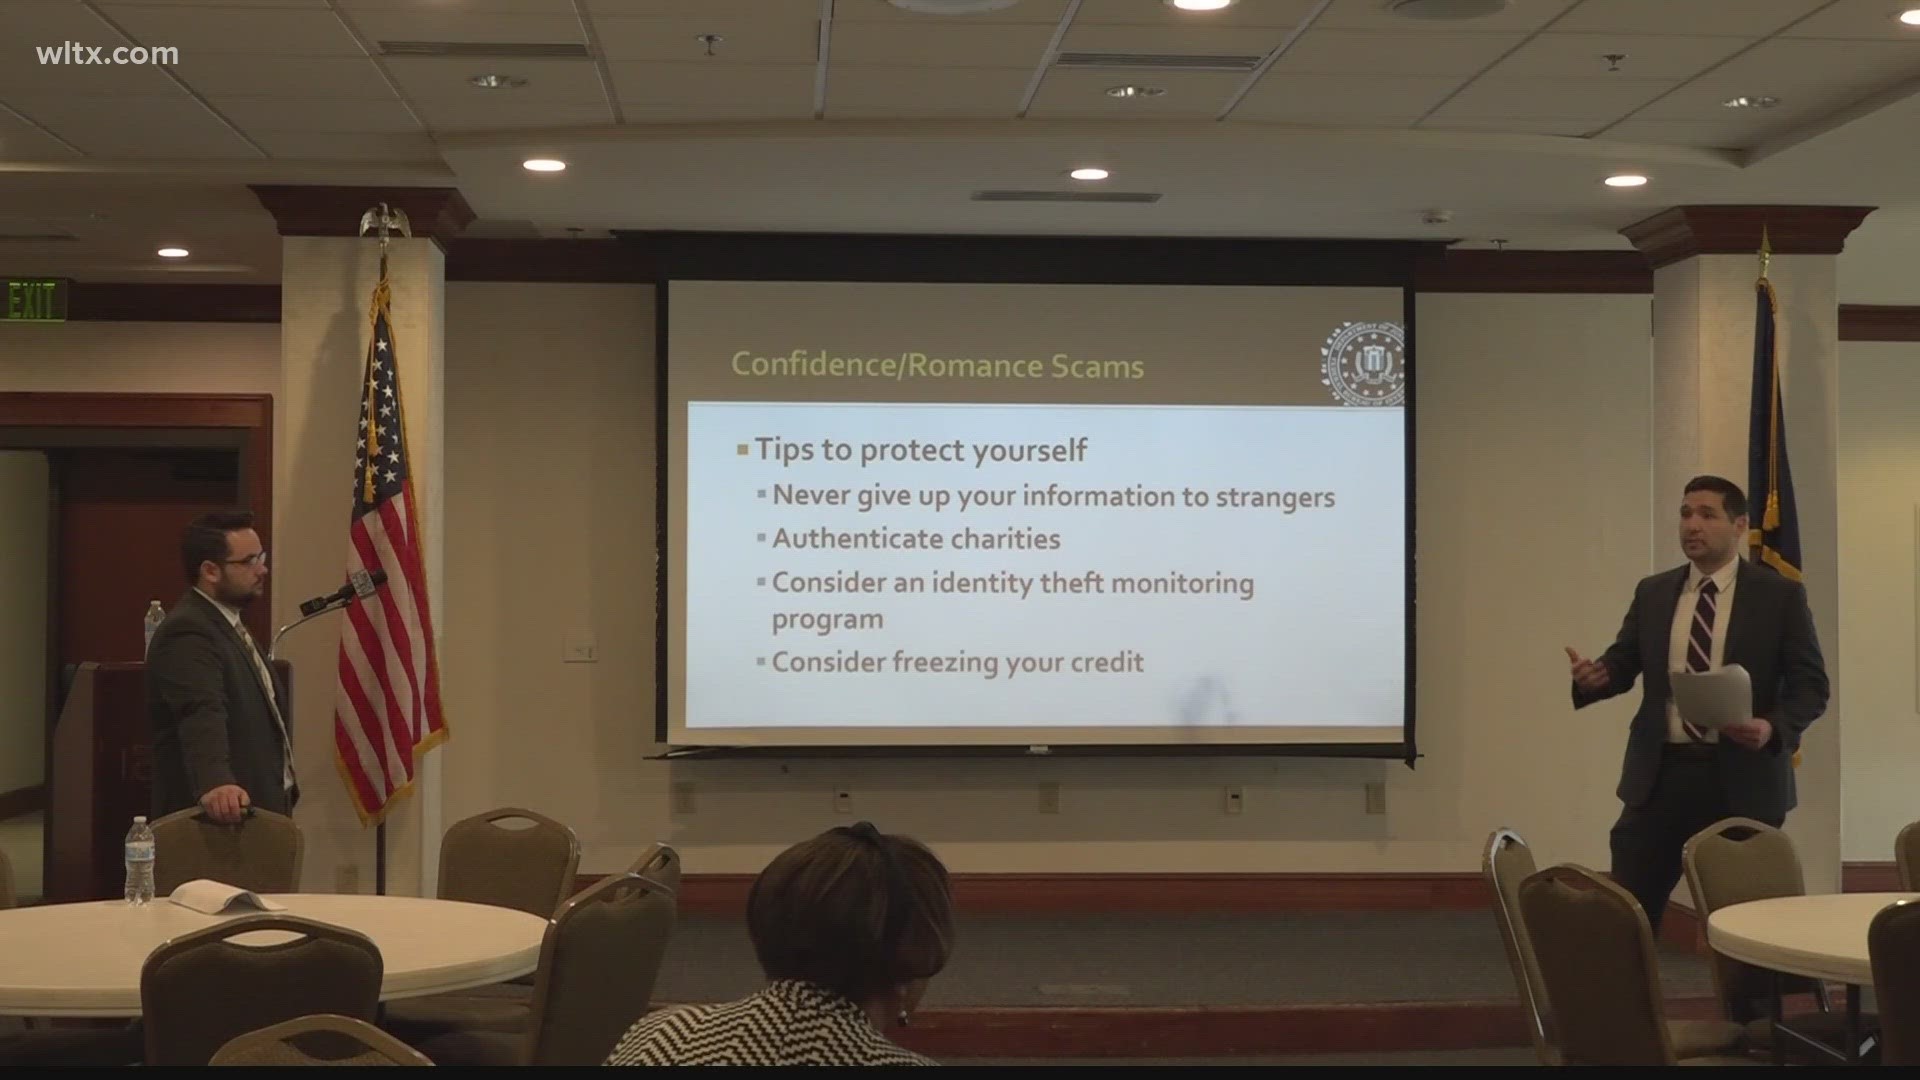 Almost 300 South Carolinians fell victims to romance scams and lost over $11M.